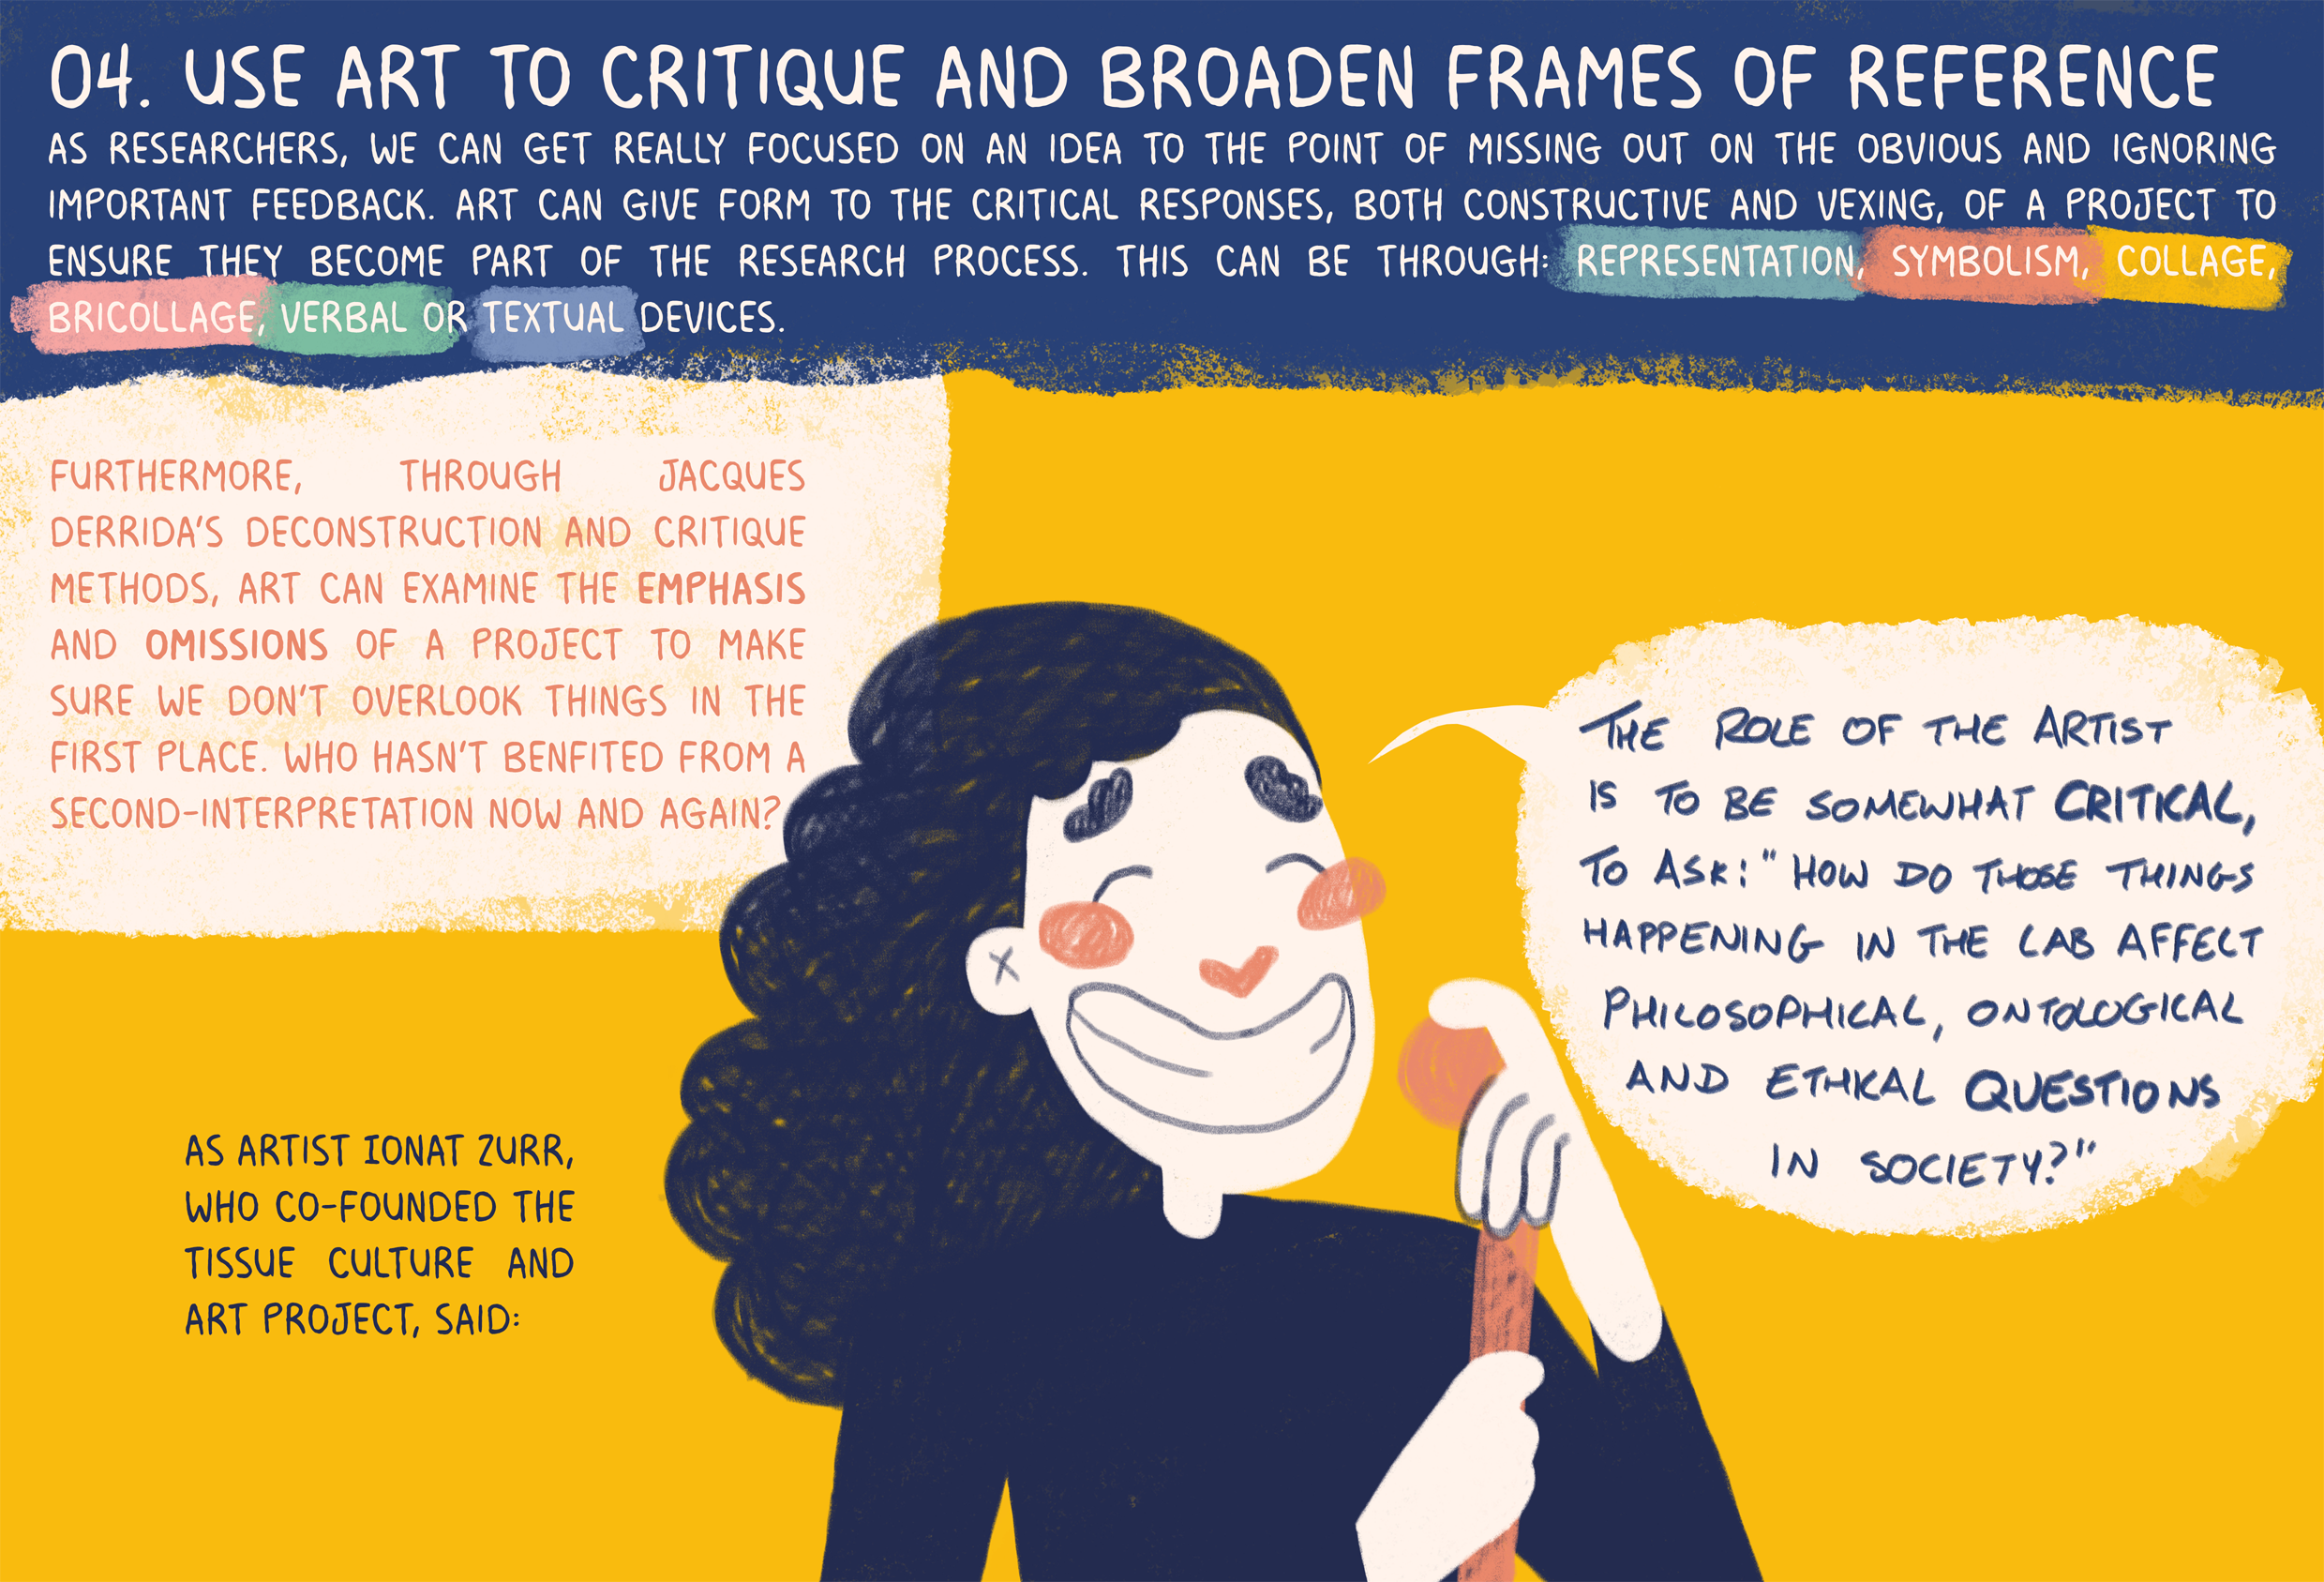 Use art to critique and broaden frames of reference.